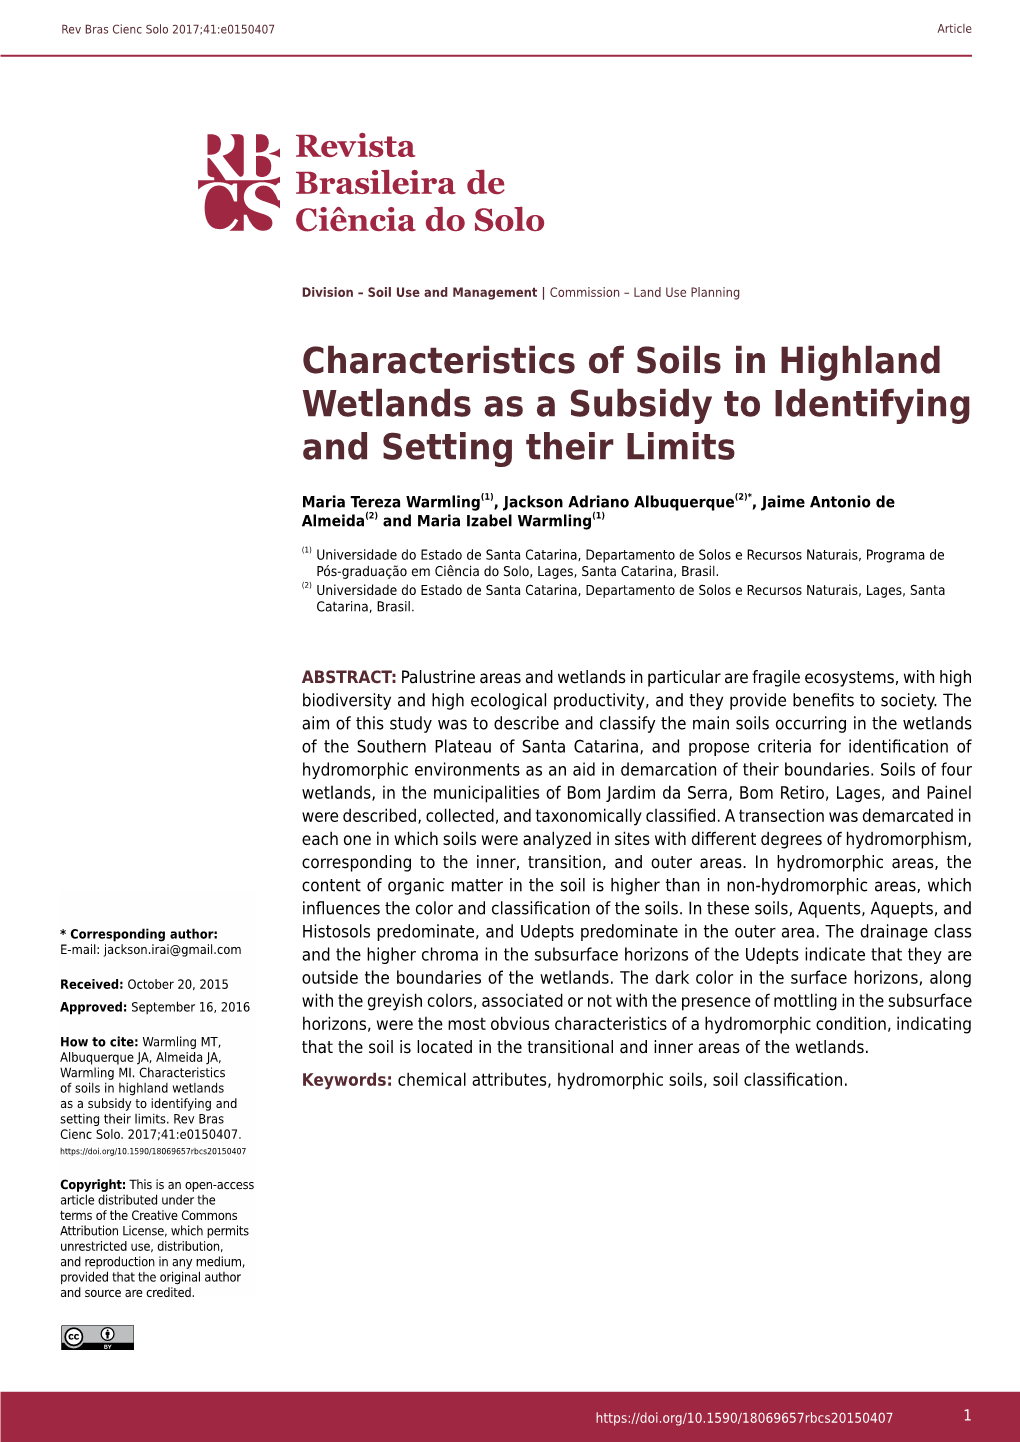 Characteristics of Soils in Highland Wetlands As a Subsidy to Identifying and Setting Their Limits